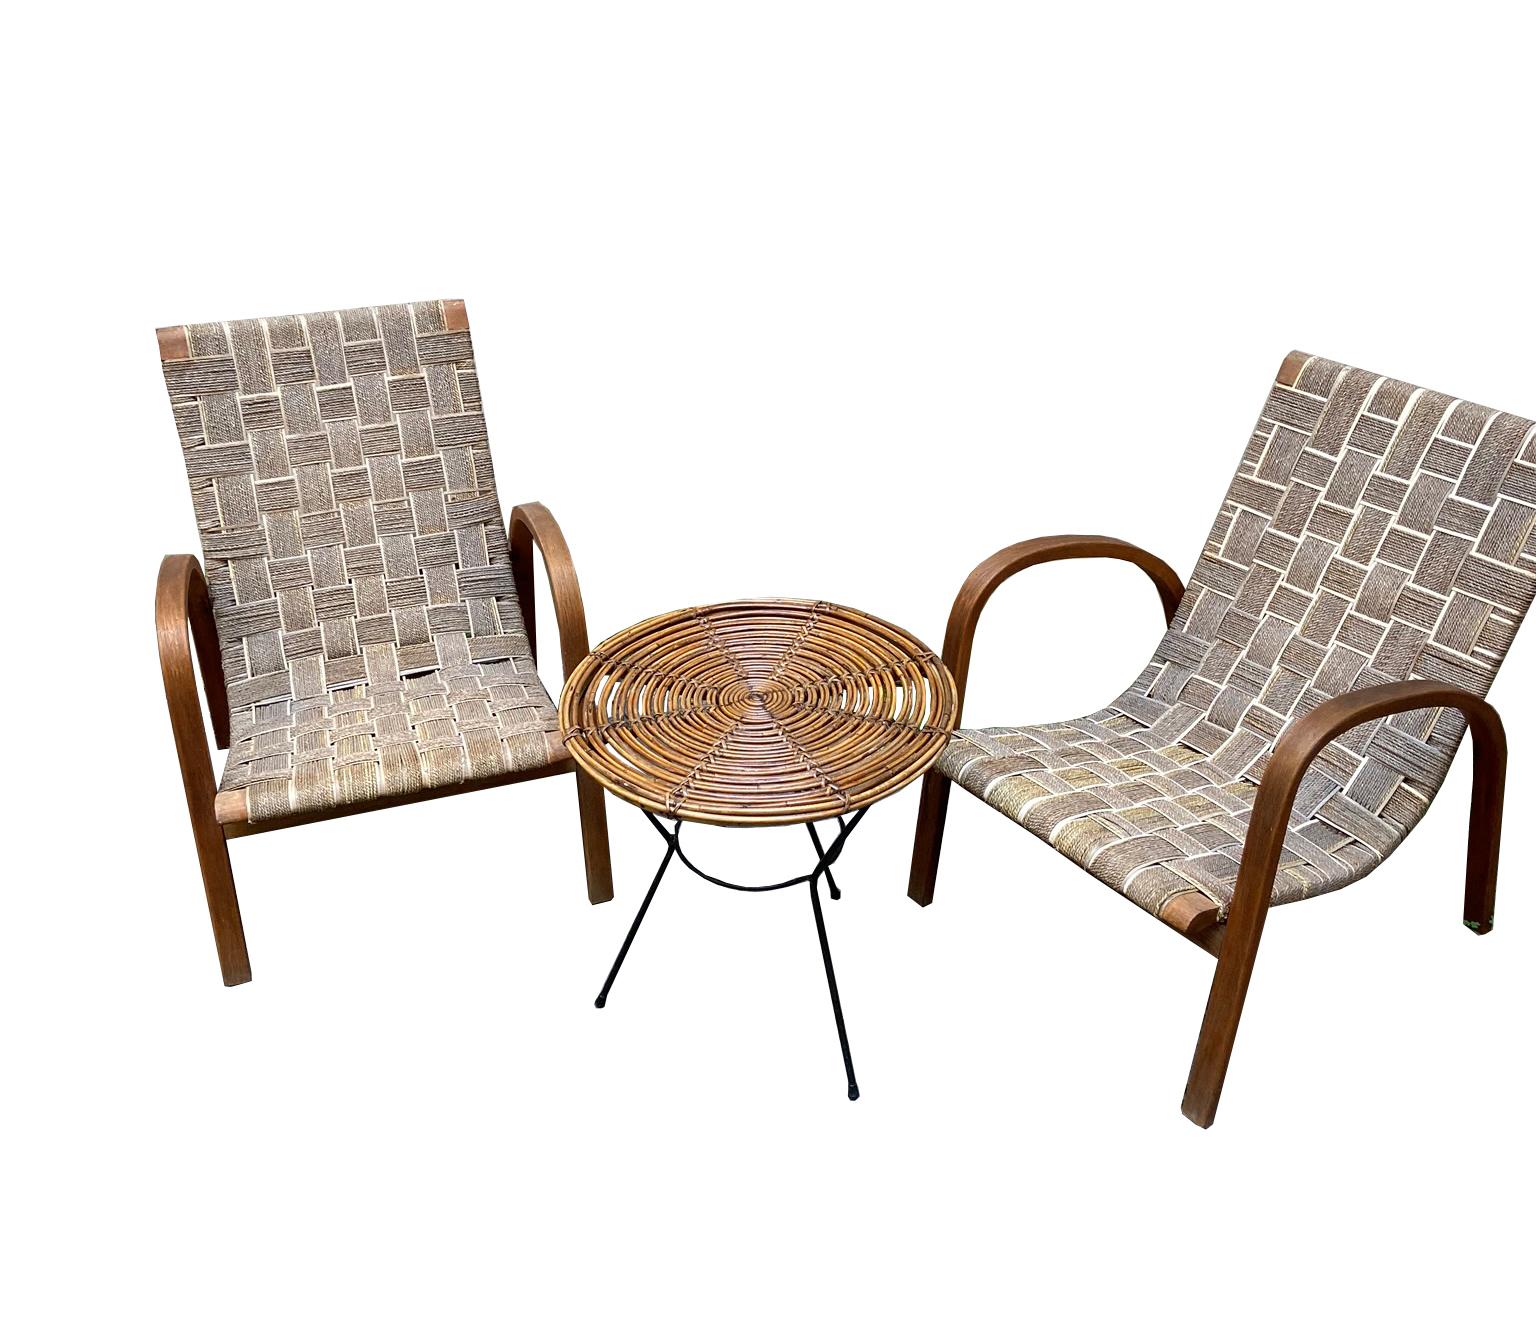 Elegant pair of terrace or garden armchairs with wooden structure and seat made of handwoven rope, 1940s.